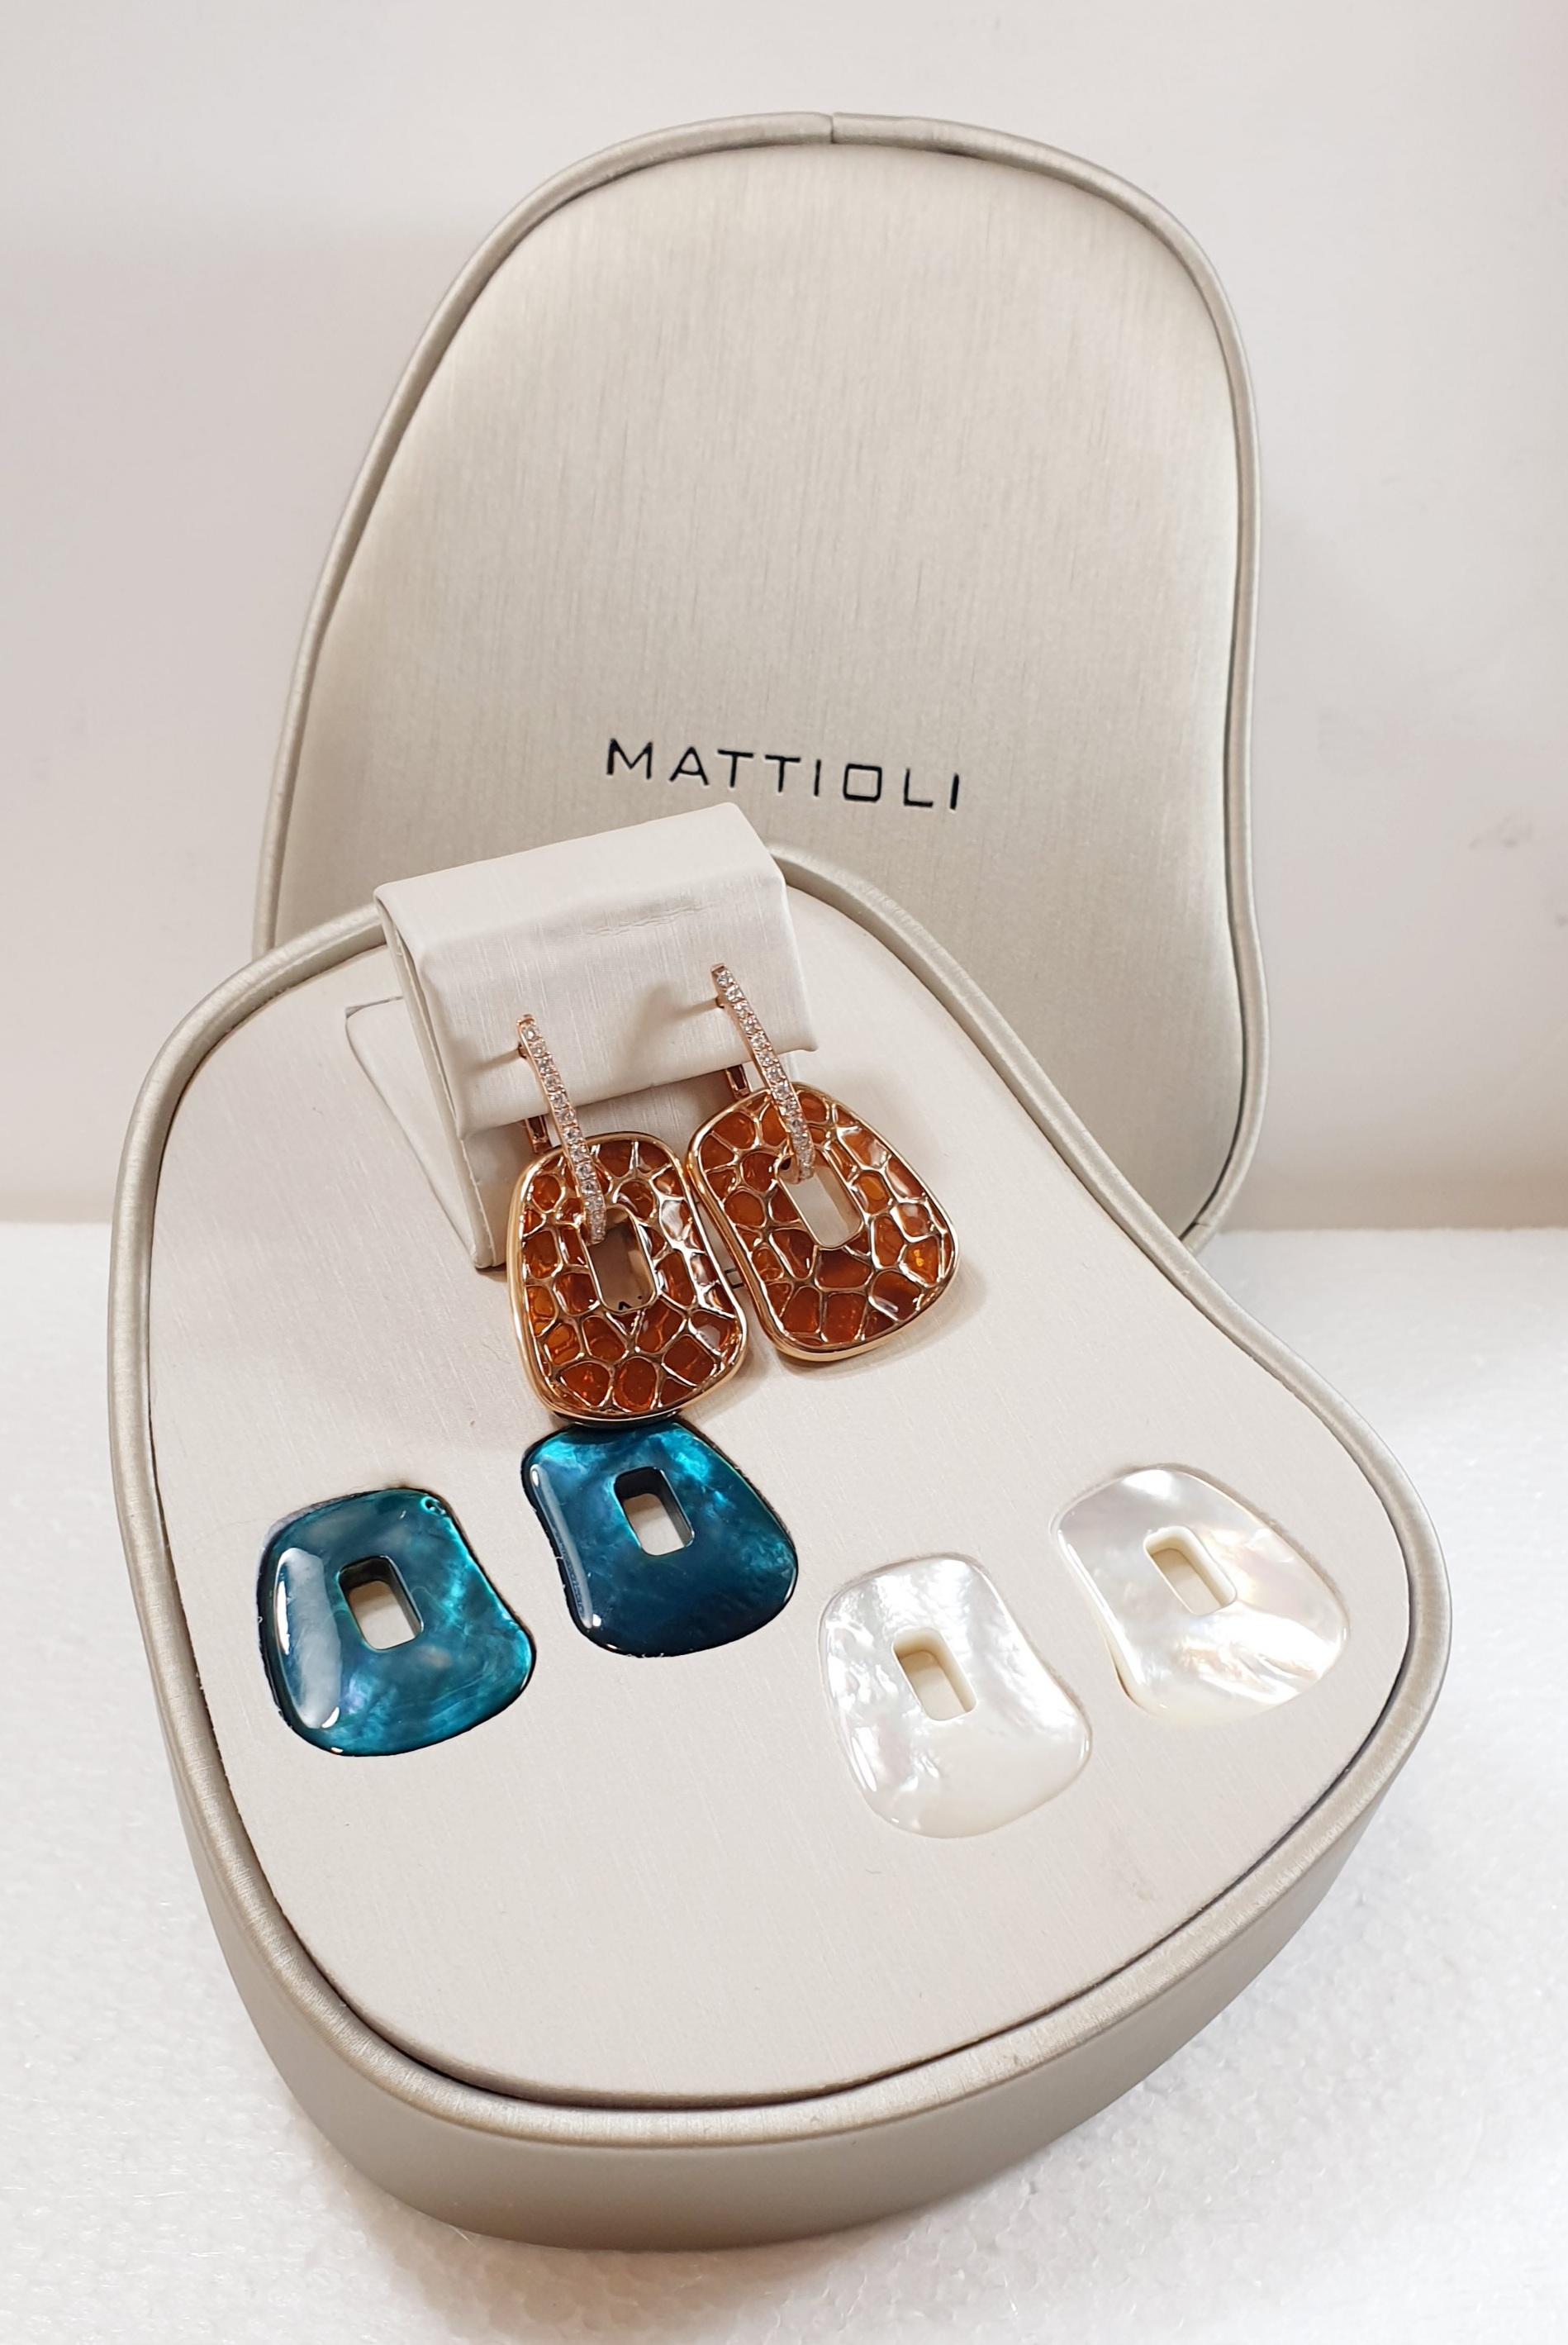 Mattioli Puzzle Safari Medium 18K Rose Gold Earrings Brown Enamel w/White Diamonds
Also available in Brown Diamonds
Earrings in rose gold 
Diamonds carat 0.40 ct
Weight 19.60 gr  Measure 22x27mm or 0.75 inches
Puzzle pendants of mother of pearl you